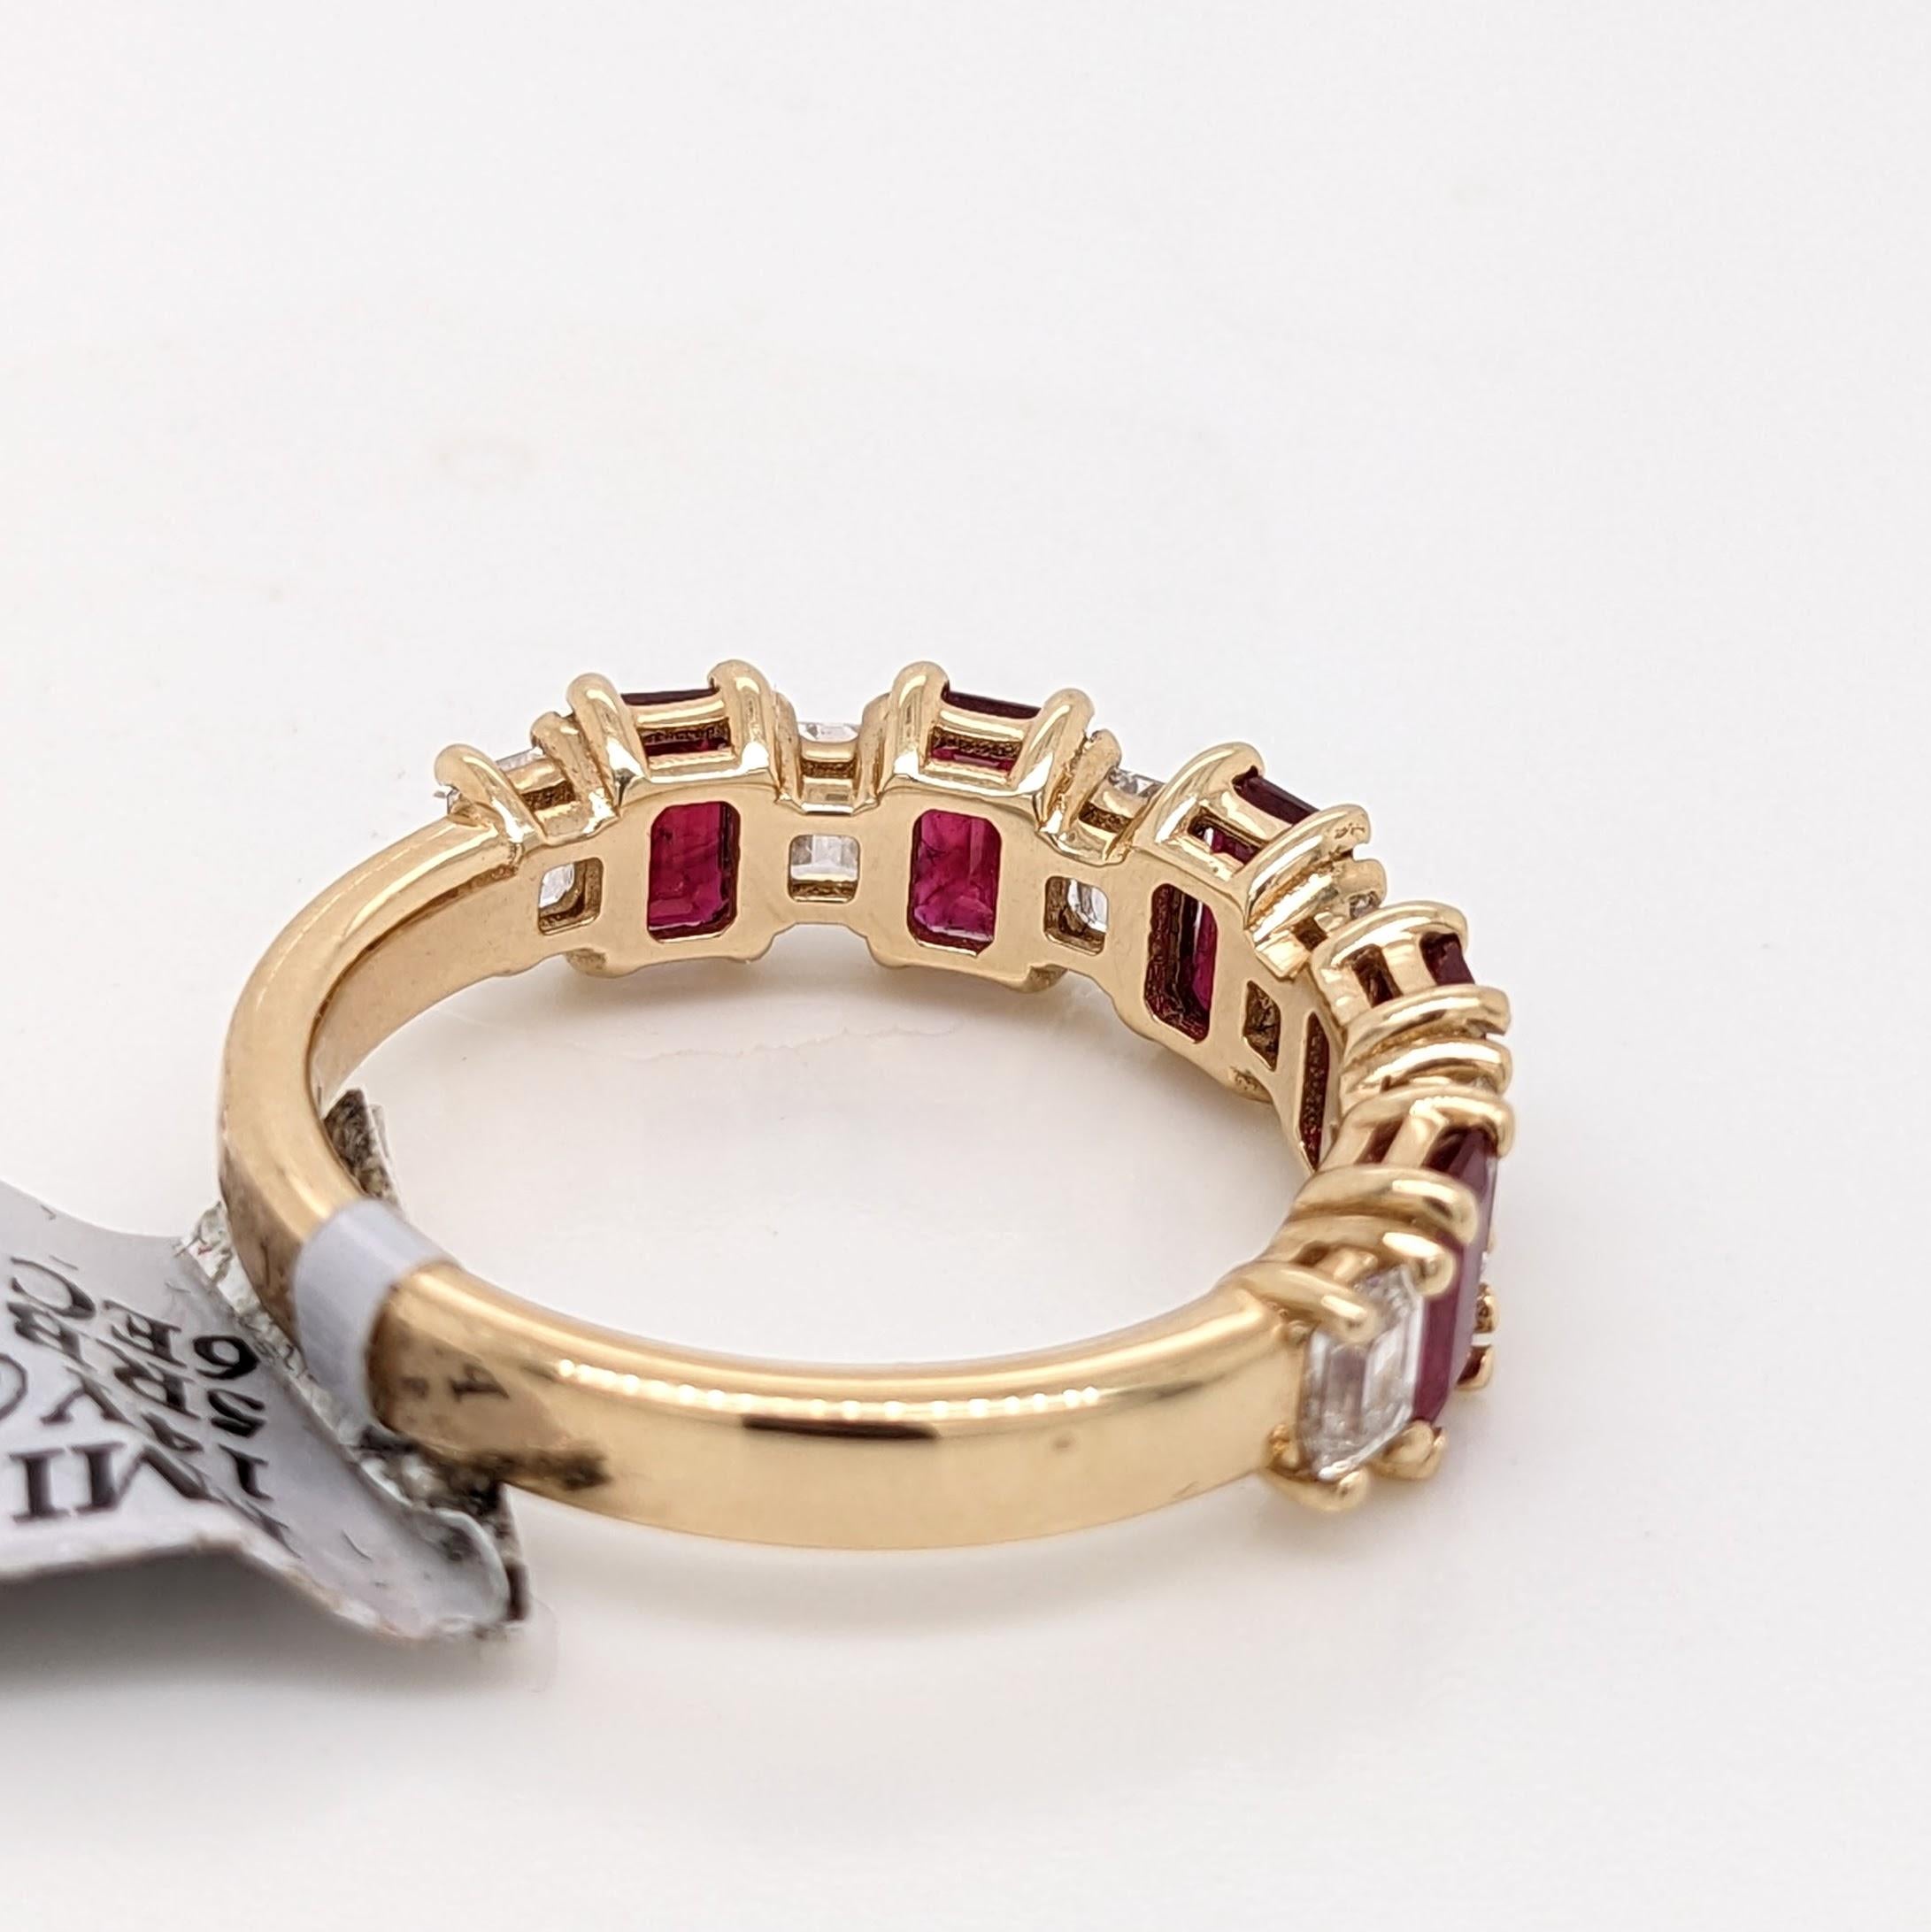 1.56ct Ruby Ring w Baguette Diamond Accents in 14K Gold Emerald Cut Rubies For Sale 3